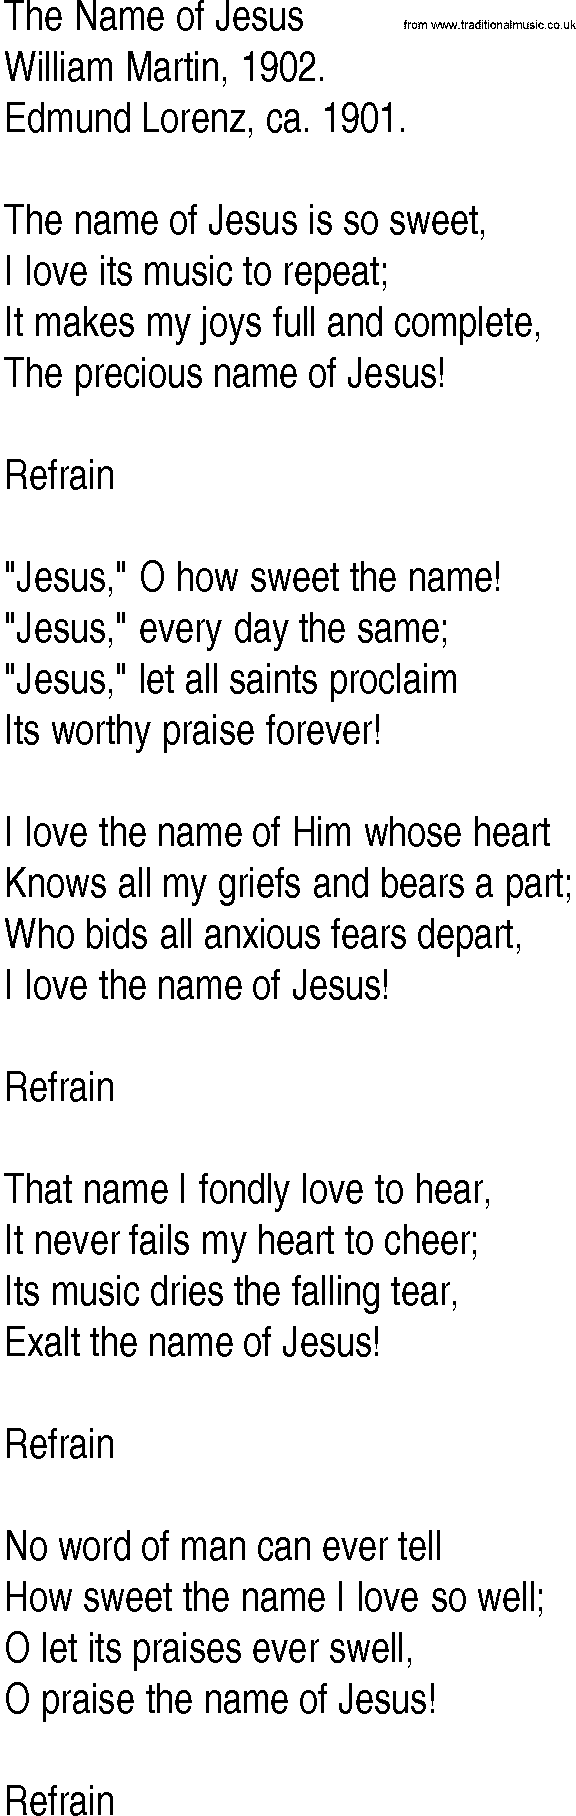 Hymn and Gospel Song: The Name of Jesus by William Martin lyrics